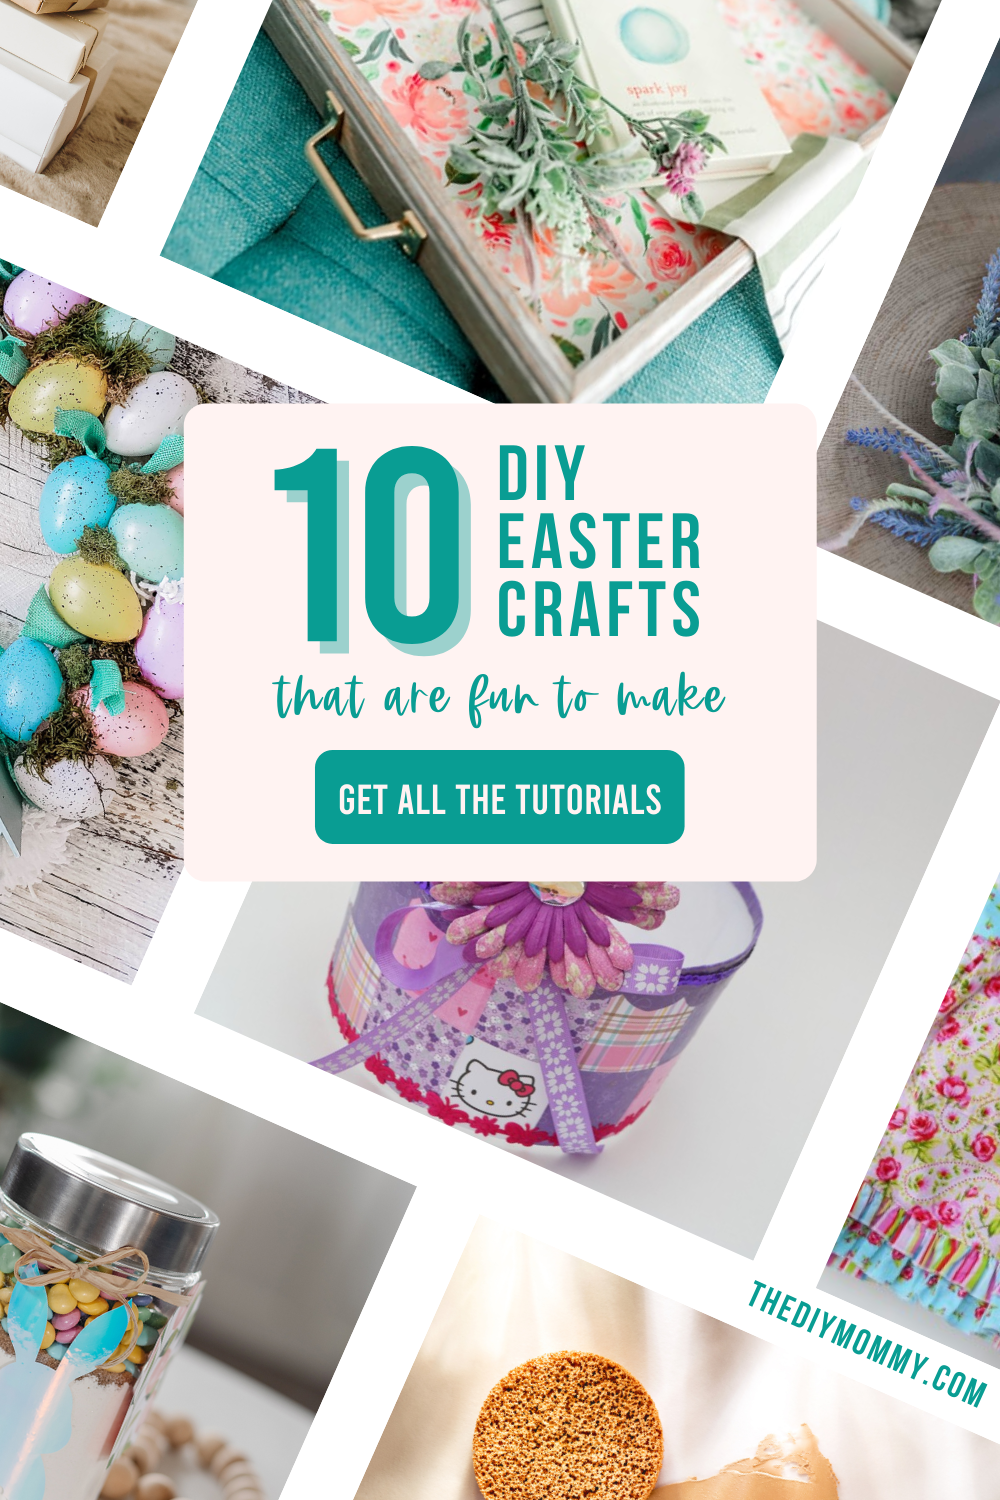 10 Easy DIY Easter Crafts That Are Fun To Make